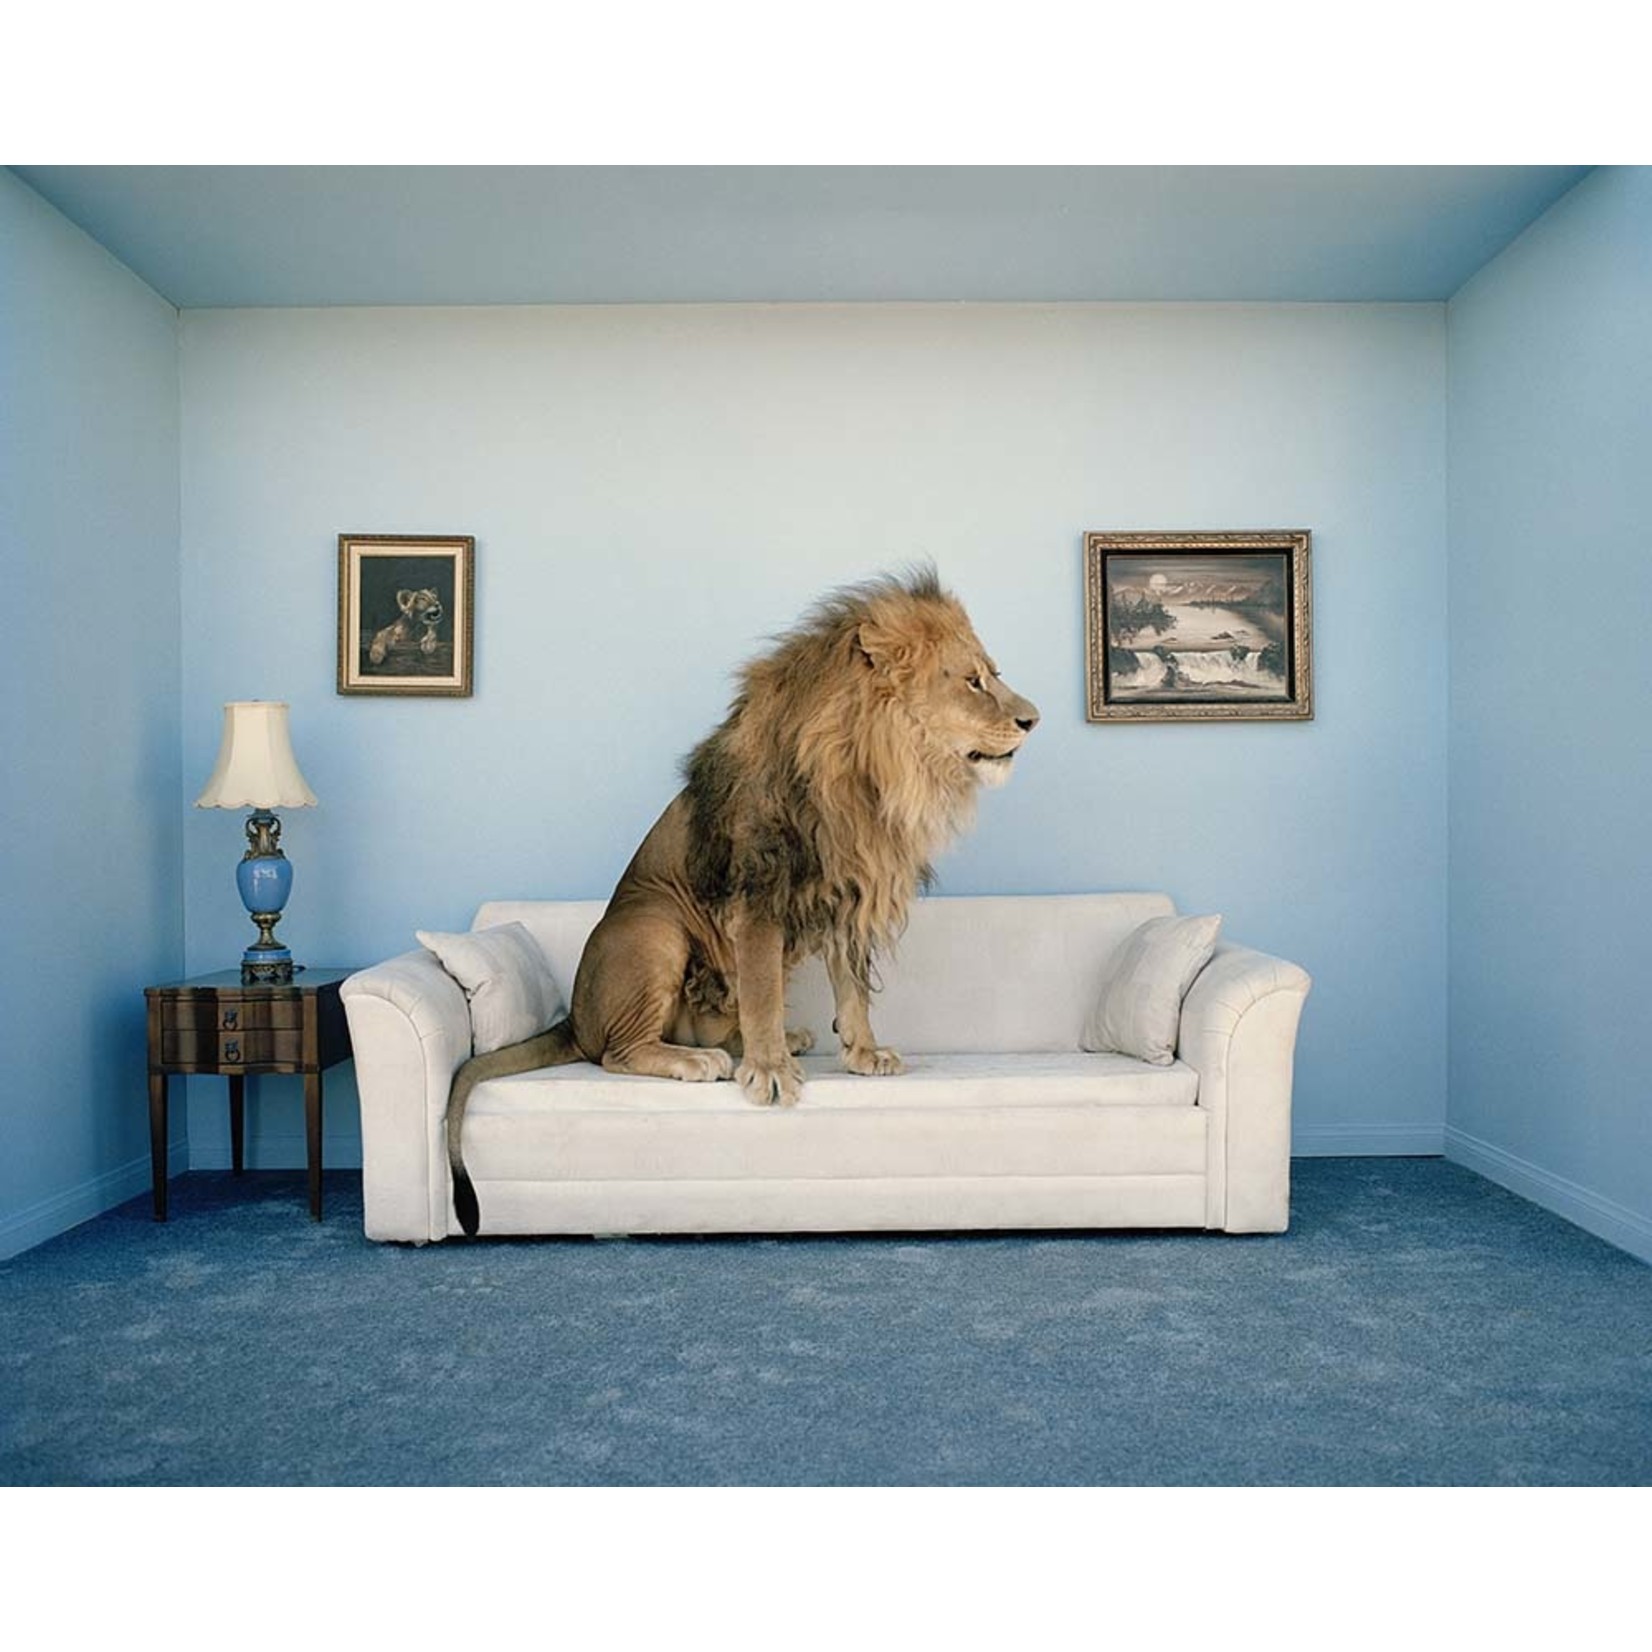 The Picturalist | via Getty Images Gallery Lion sitting on couch, side view by Matthias Clamer via Getty Images Gallery